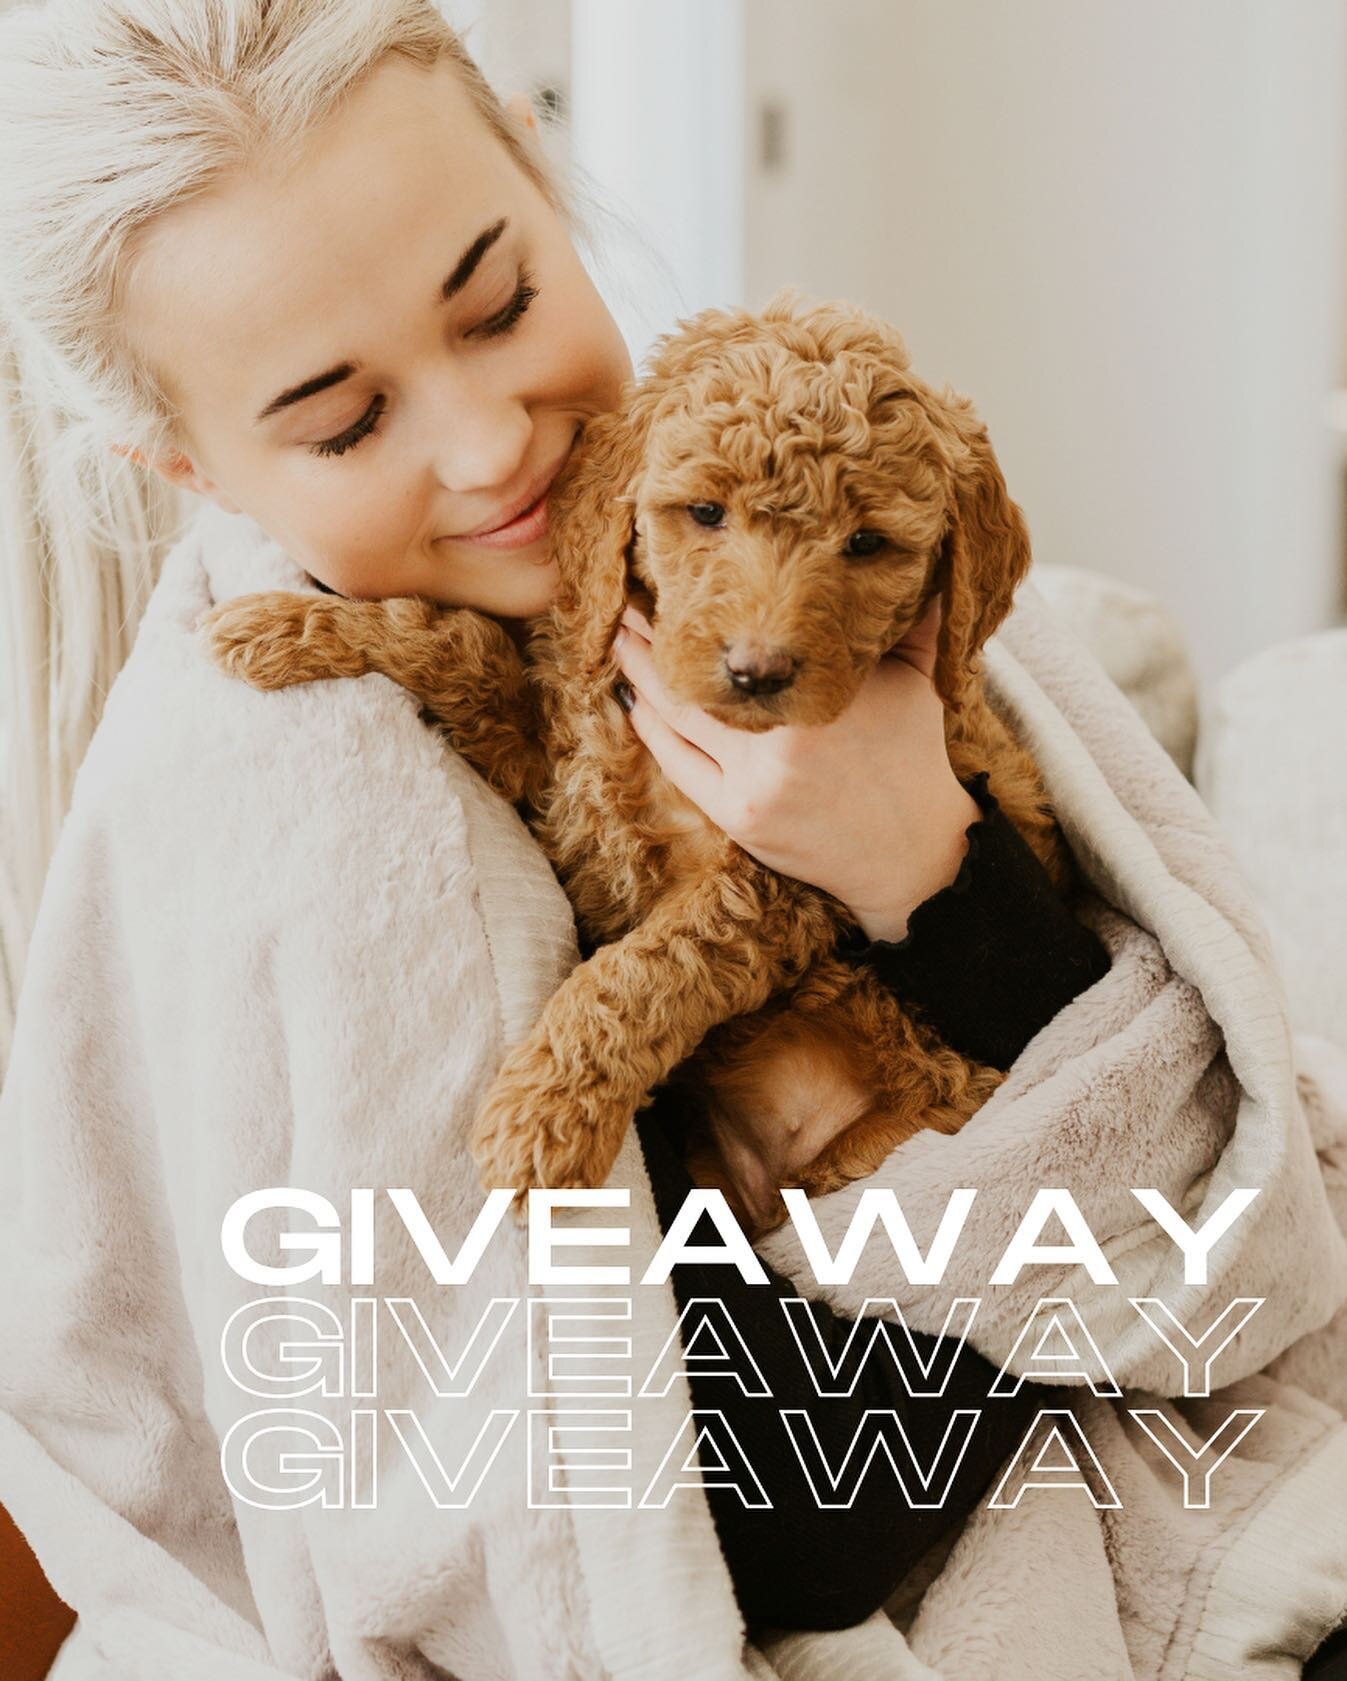 The BIGGEST giveaway we&rsquo;ve EVER done!!! 🐶 🐾 

One lucky winner will receive $500 towards a MLF PUPPY + Saranoni blankets for you to snuggle your new pup 🐶  WHAAAAT! 🫢 We can&rsquo;t believe it either!! 

HOW TO ENTER:
💗 like this post
💗 f